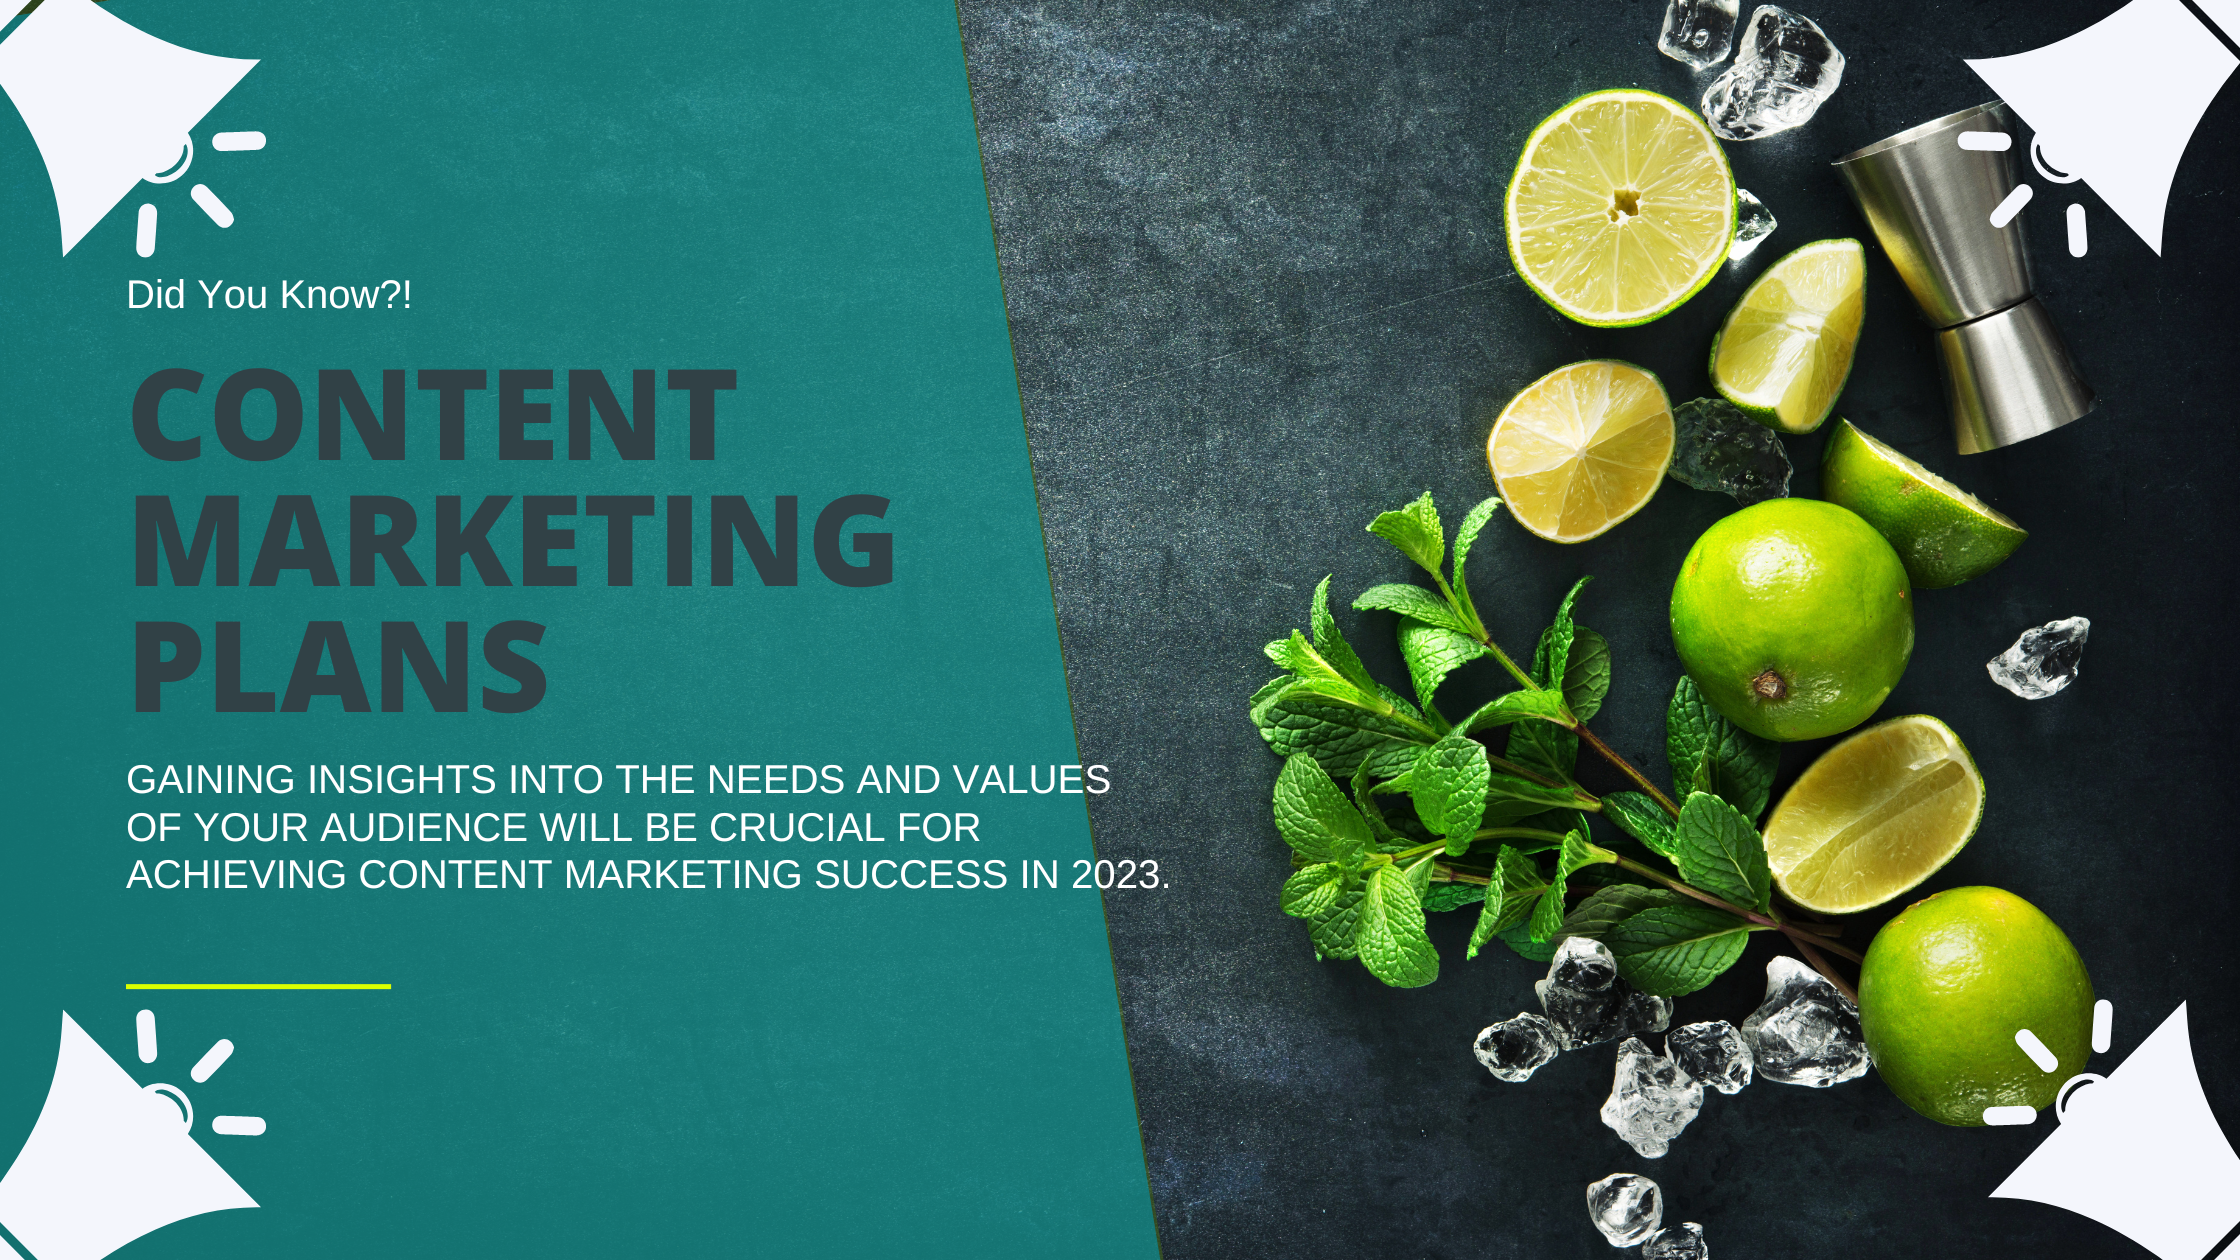  Here are 8 interesting and important facts about content marketing that you should be aware of 